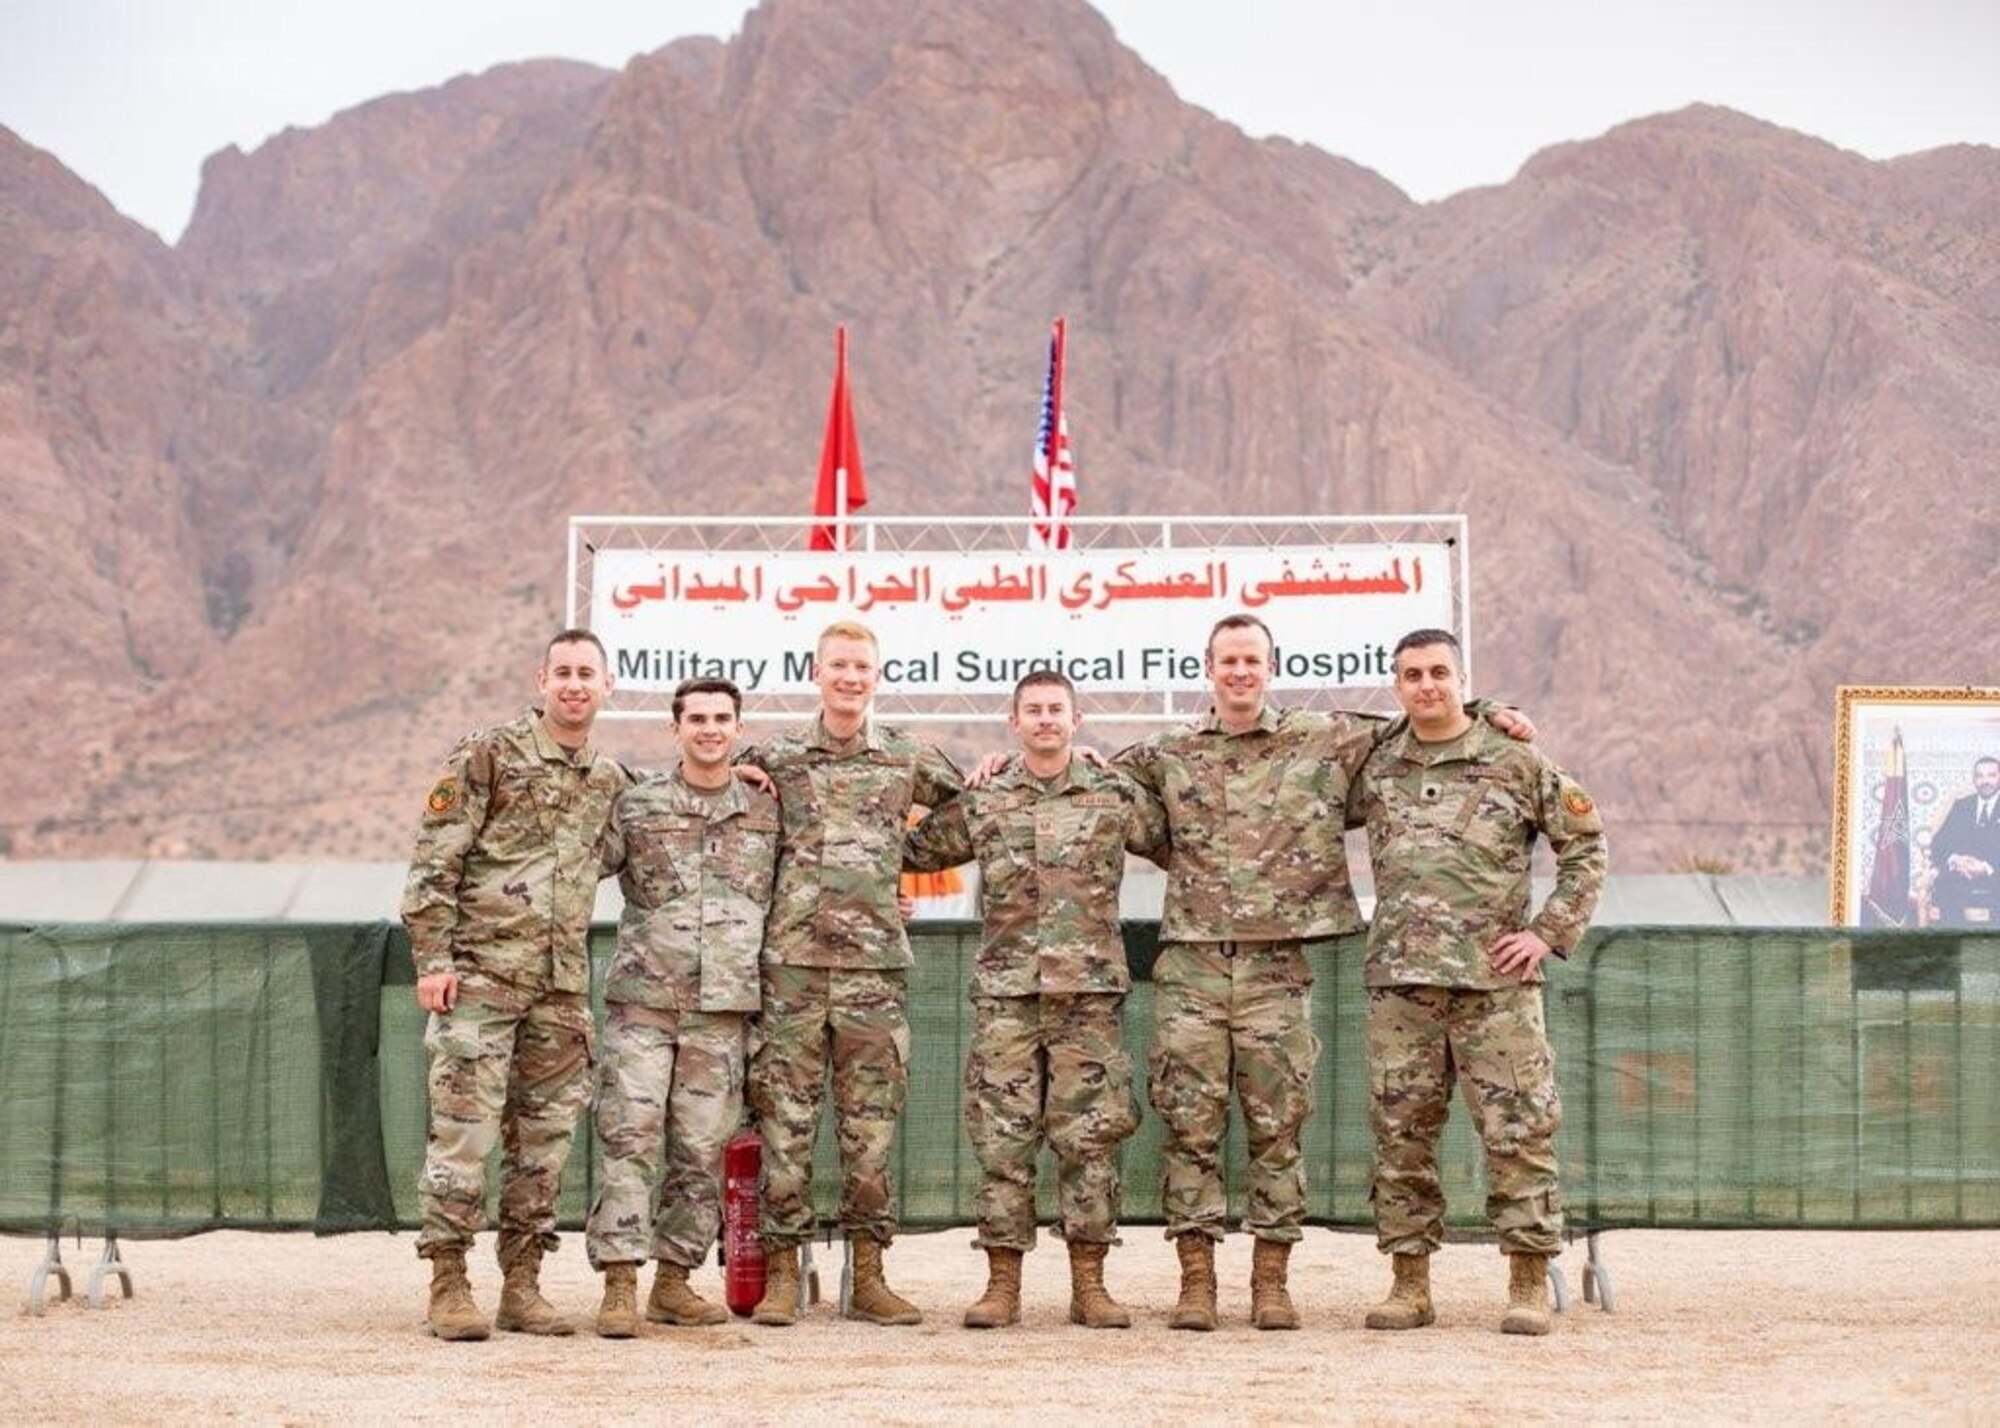 Supporting Exercise African Lion 21 and pictured from left are 2nd Lt. Matthew Manner, 1st Lt. Morgan Geneste, Maj. Stephen Graff, Tech Sgt. Ty Wells, Maj. Zachary Zeigler and Lt. Col. Qais Rabadi. (Courtesy photo)